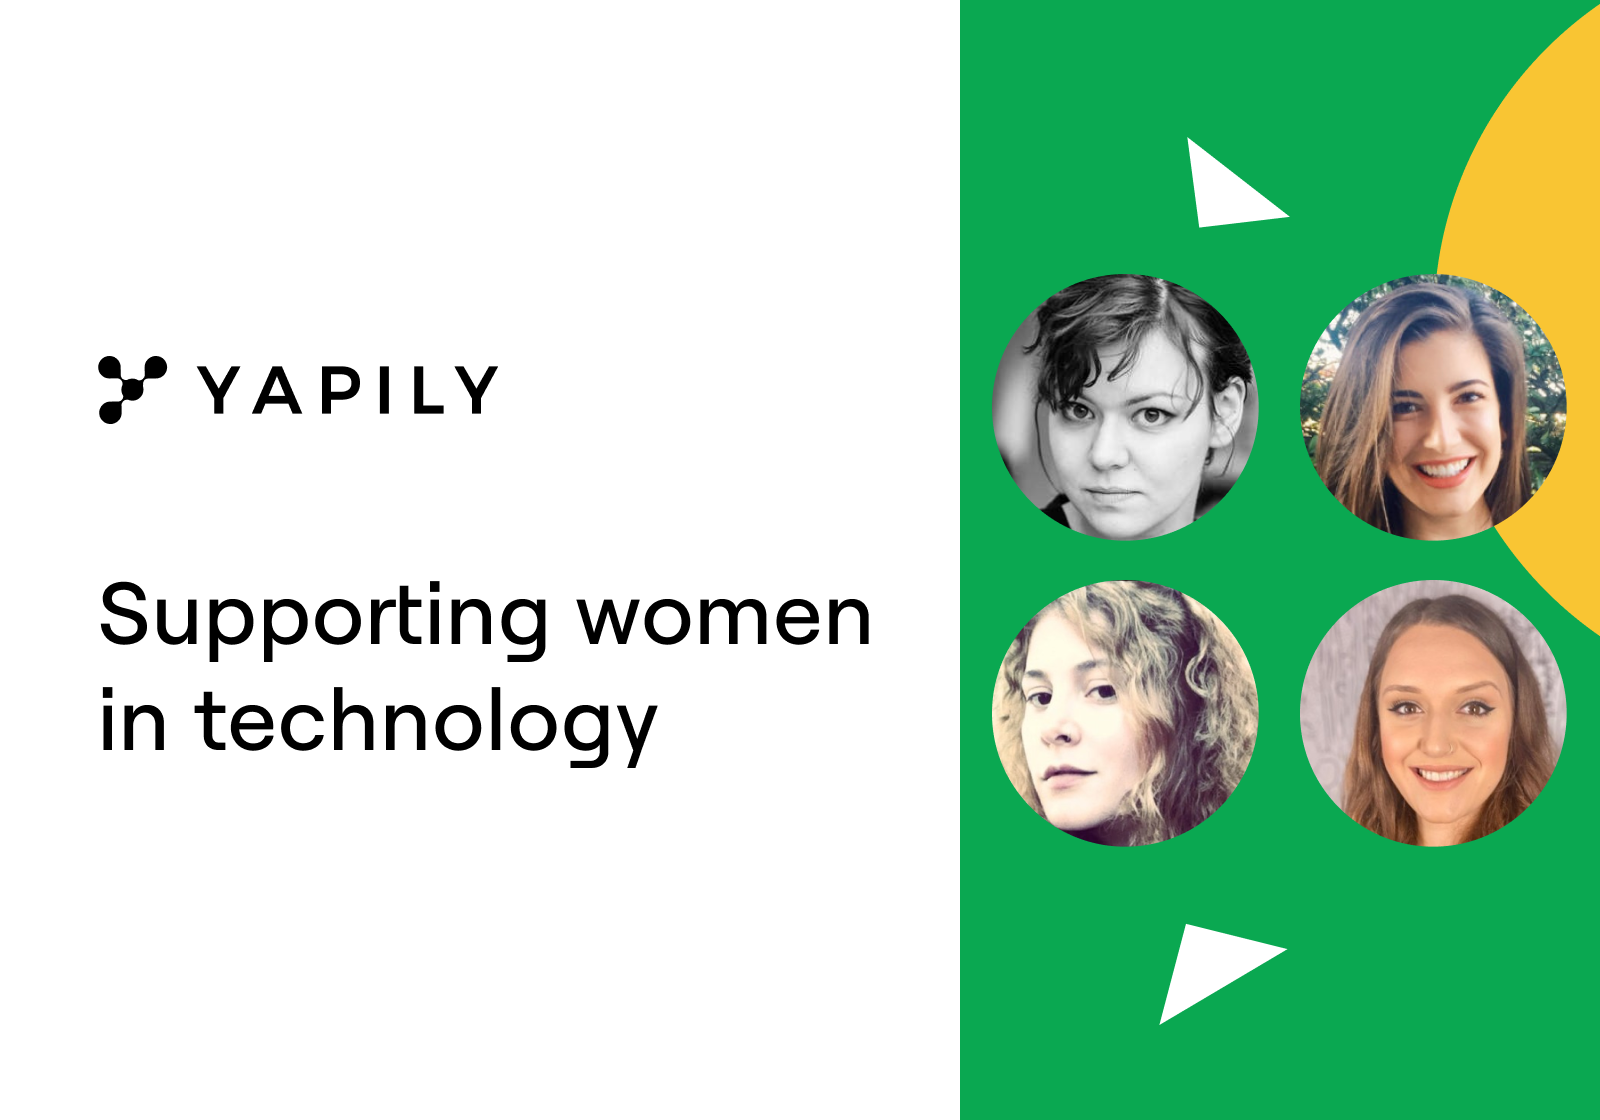 Gender diversity is a very important issue and at Yapily, we want to encourage as many women as we can to be a part of, what we believe, is an exciting fast growth sector. We interviewed some of the amazing women at Yapily, to share why they chose tech!